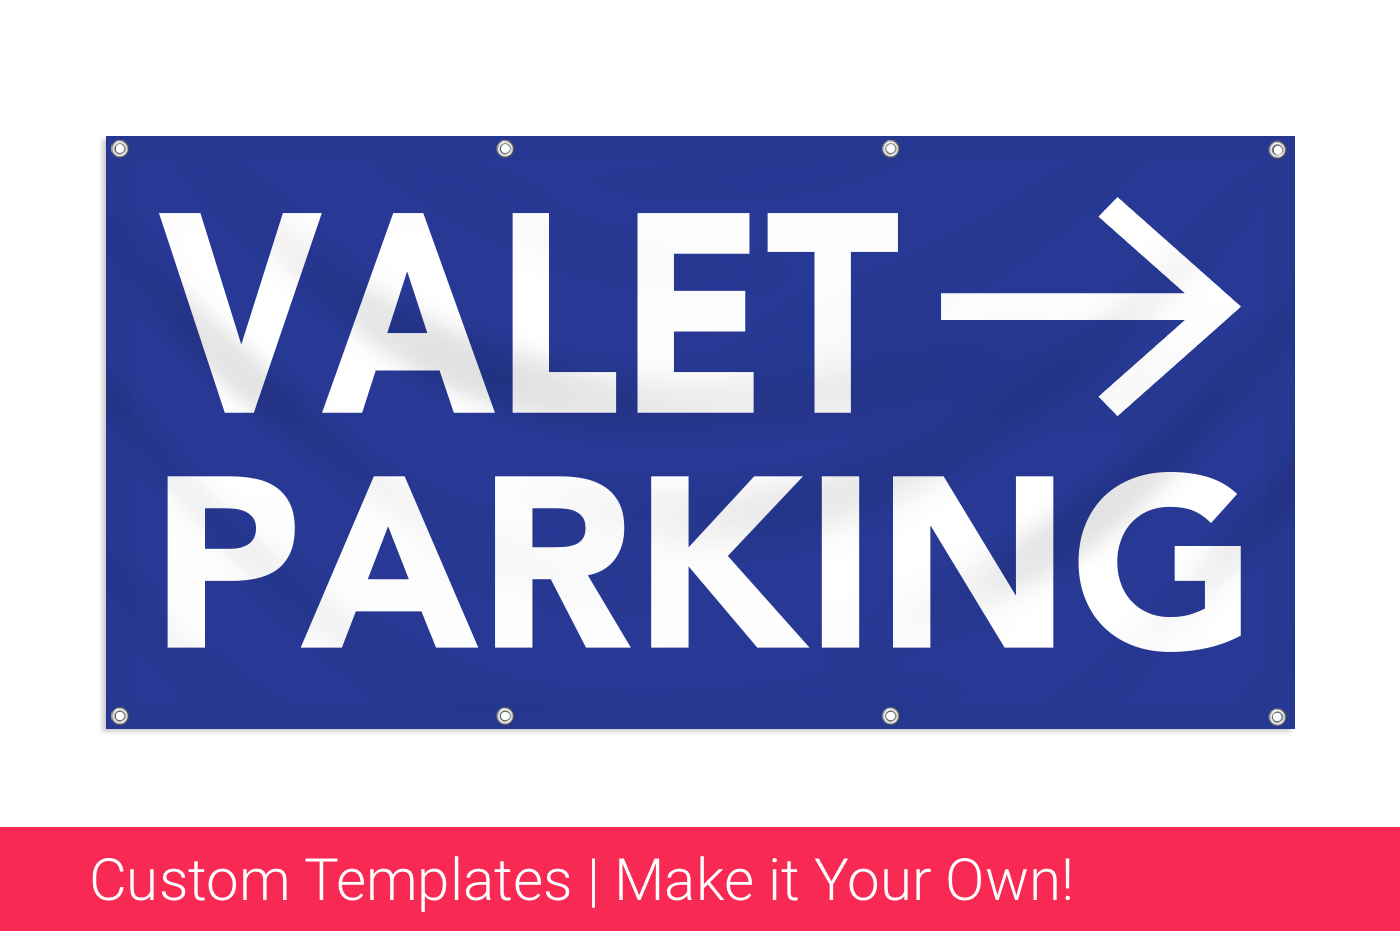 Valet Parking Banners